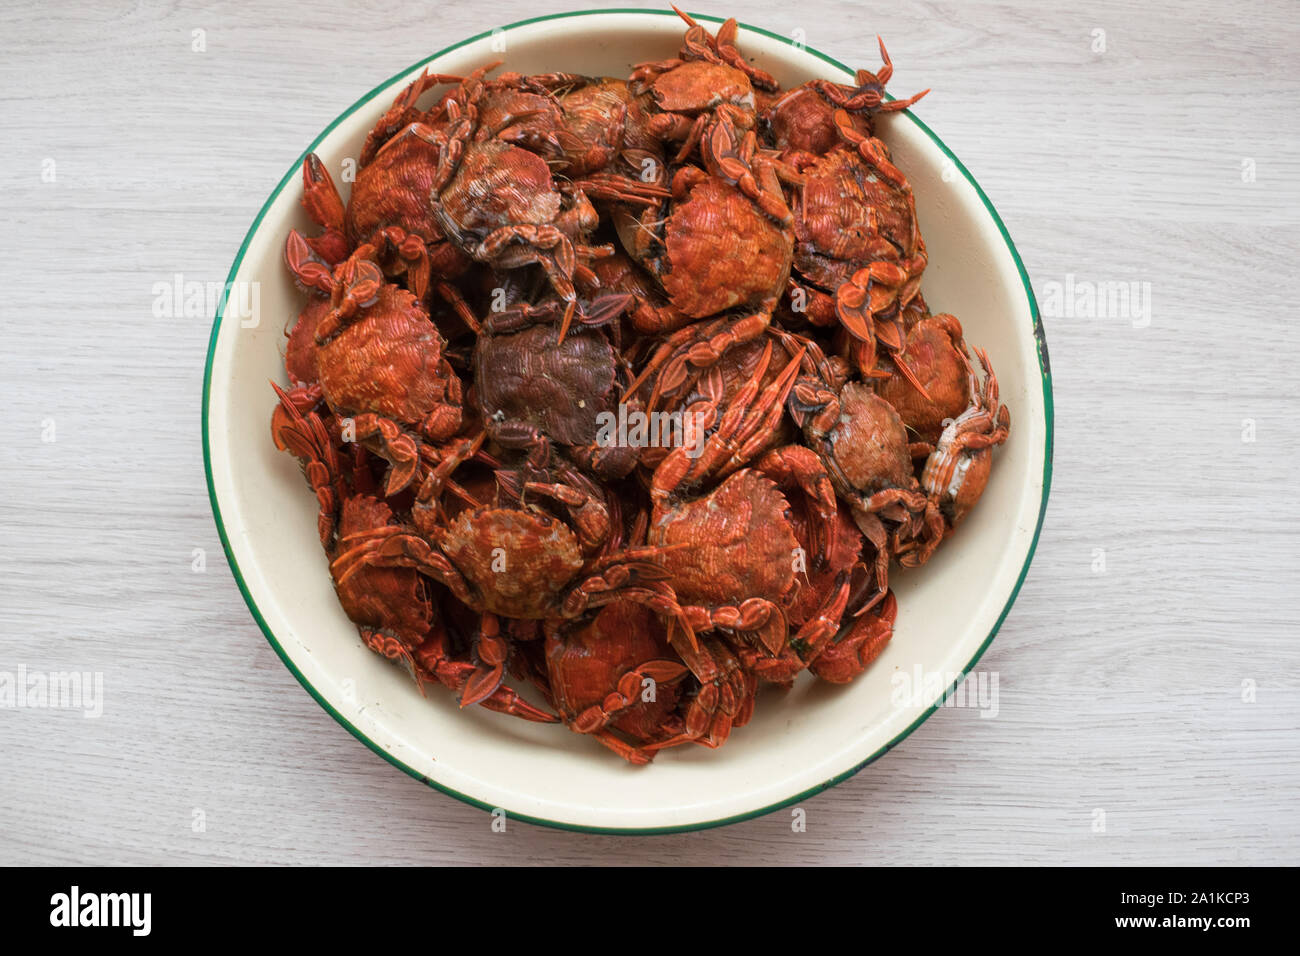 Top view of cooked blue crabs on a plate Stock Photo